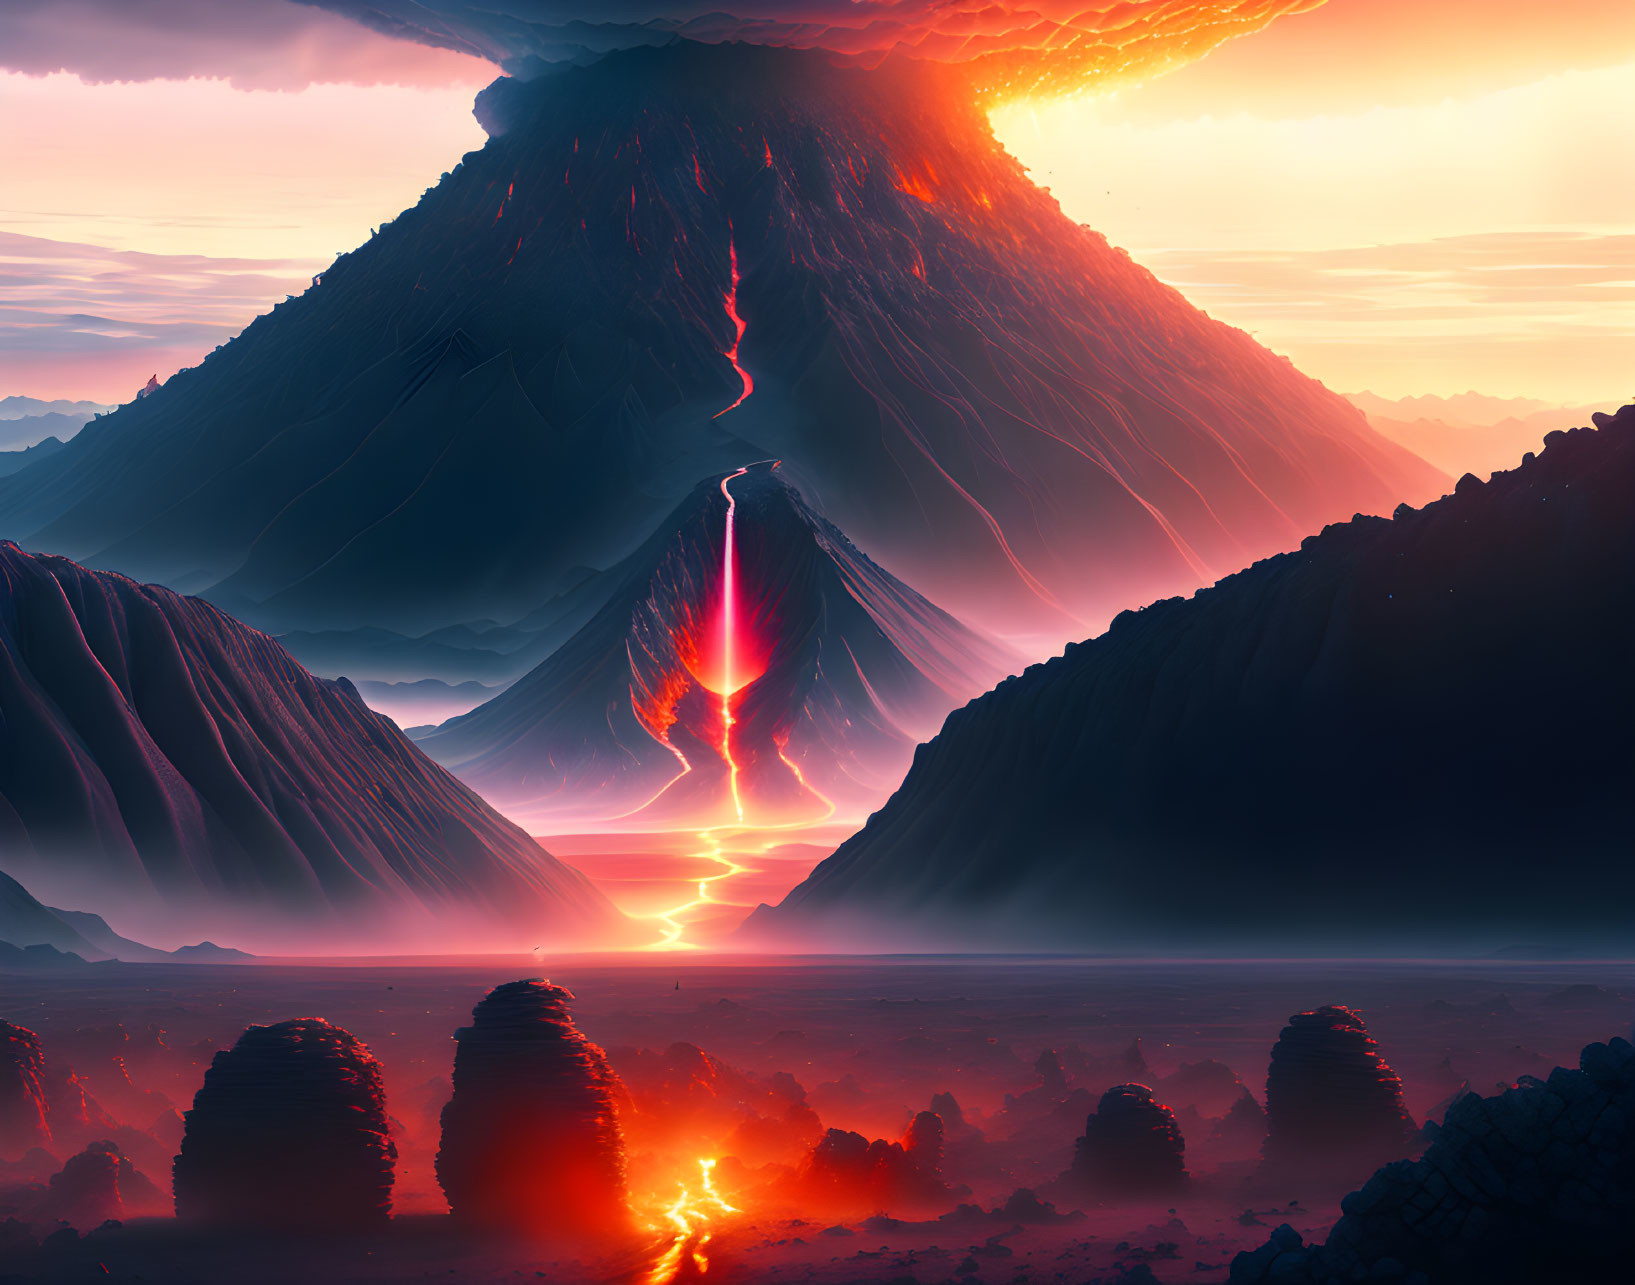 Digital Artwork: Erupting Volcano with Flowing Lava and Dramatic Sky